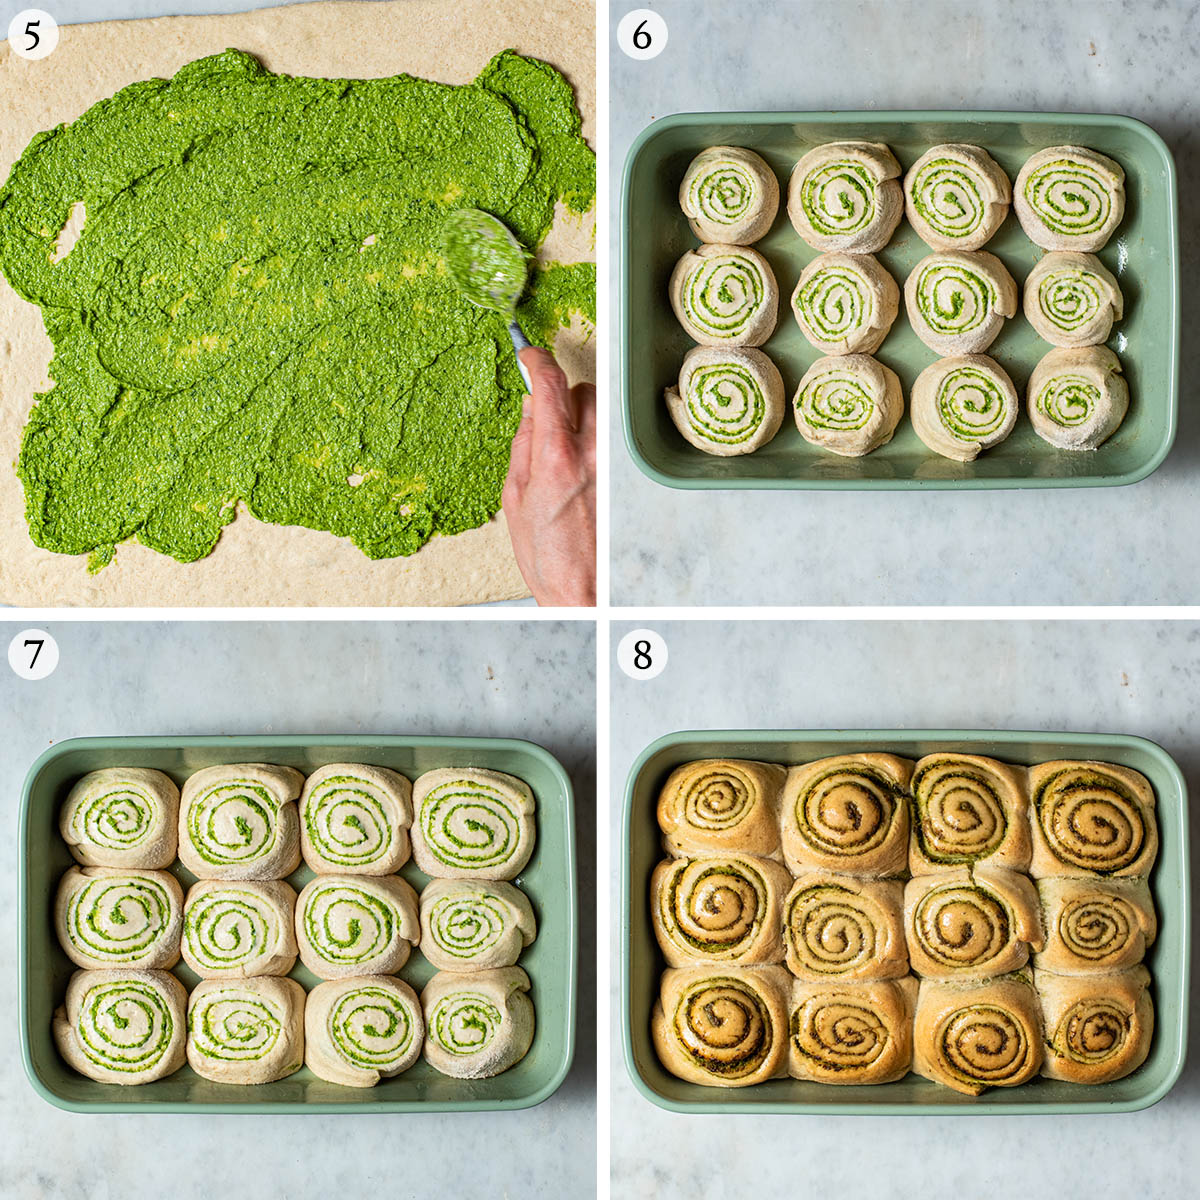 Pesto buns steps 5 to 8, filling the buns, second rise, and baked.